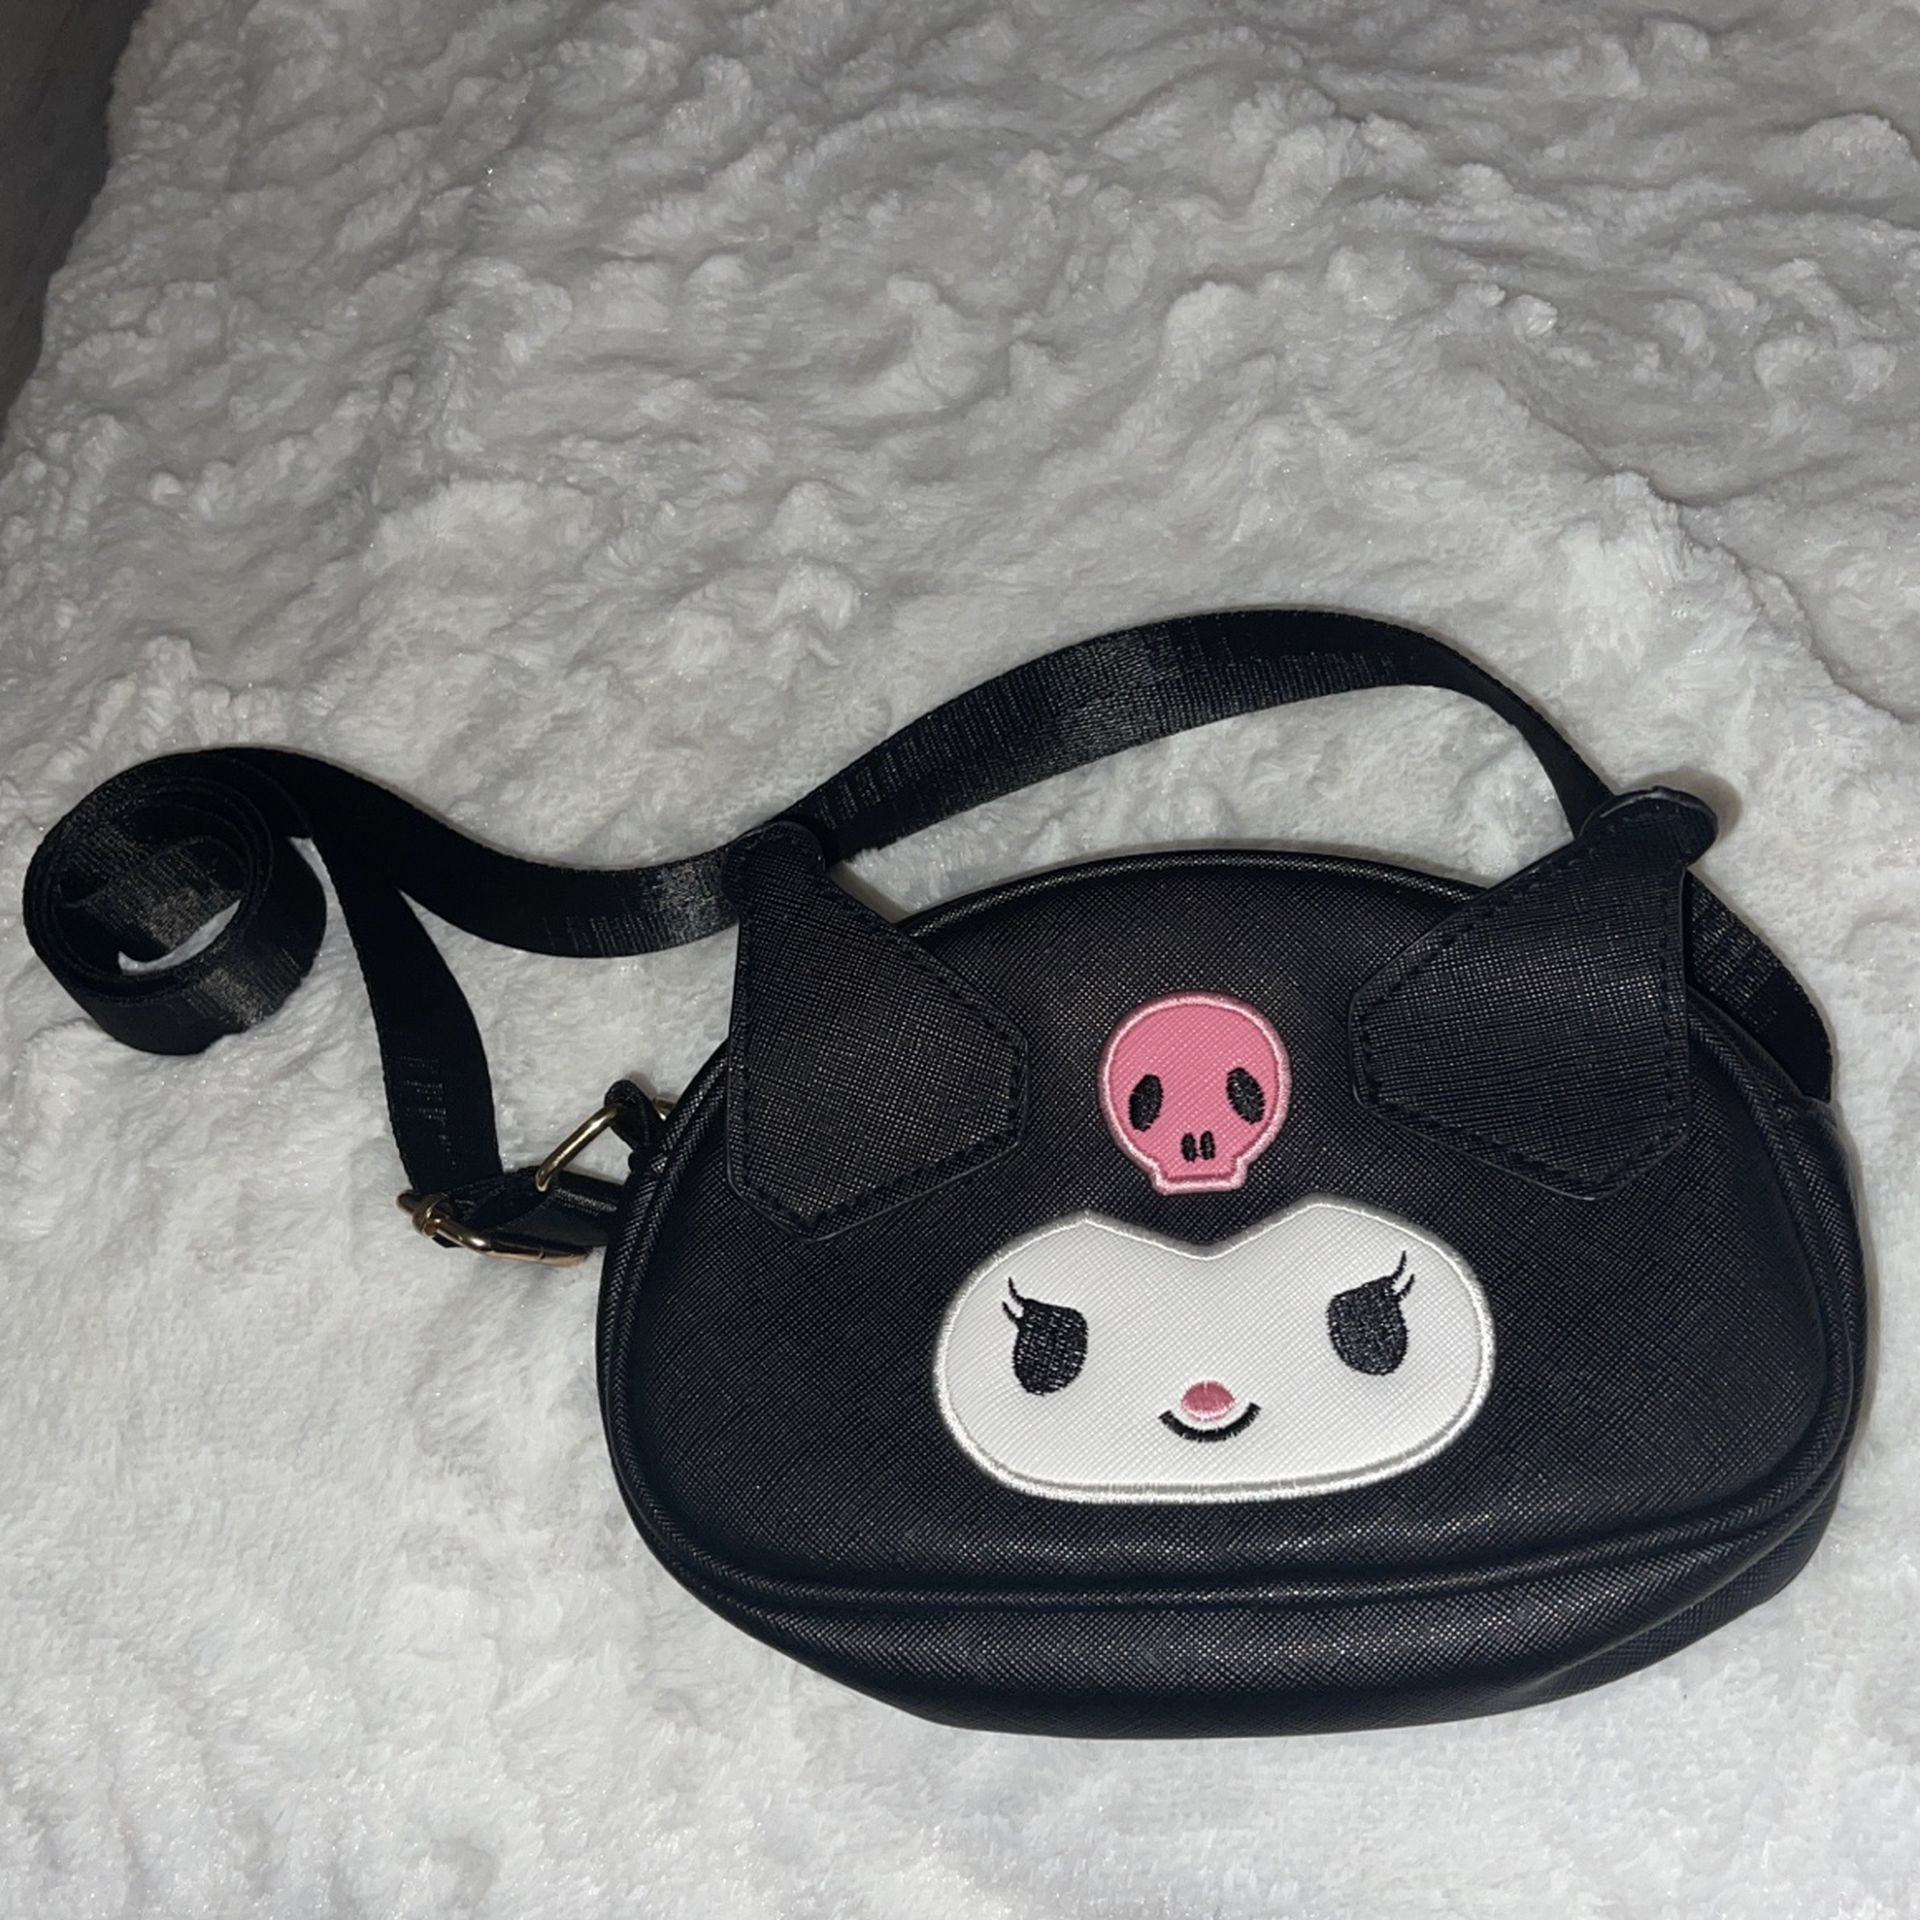 Kiromi Bag for Sale in San Marcos, CA - OfferUp